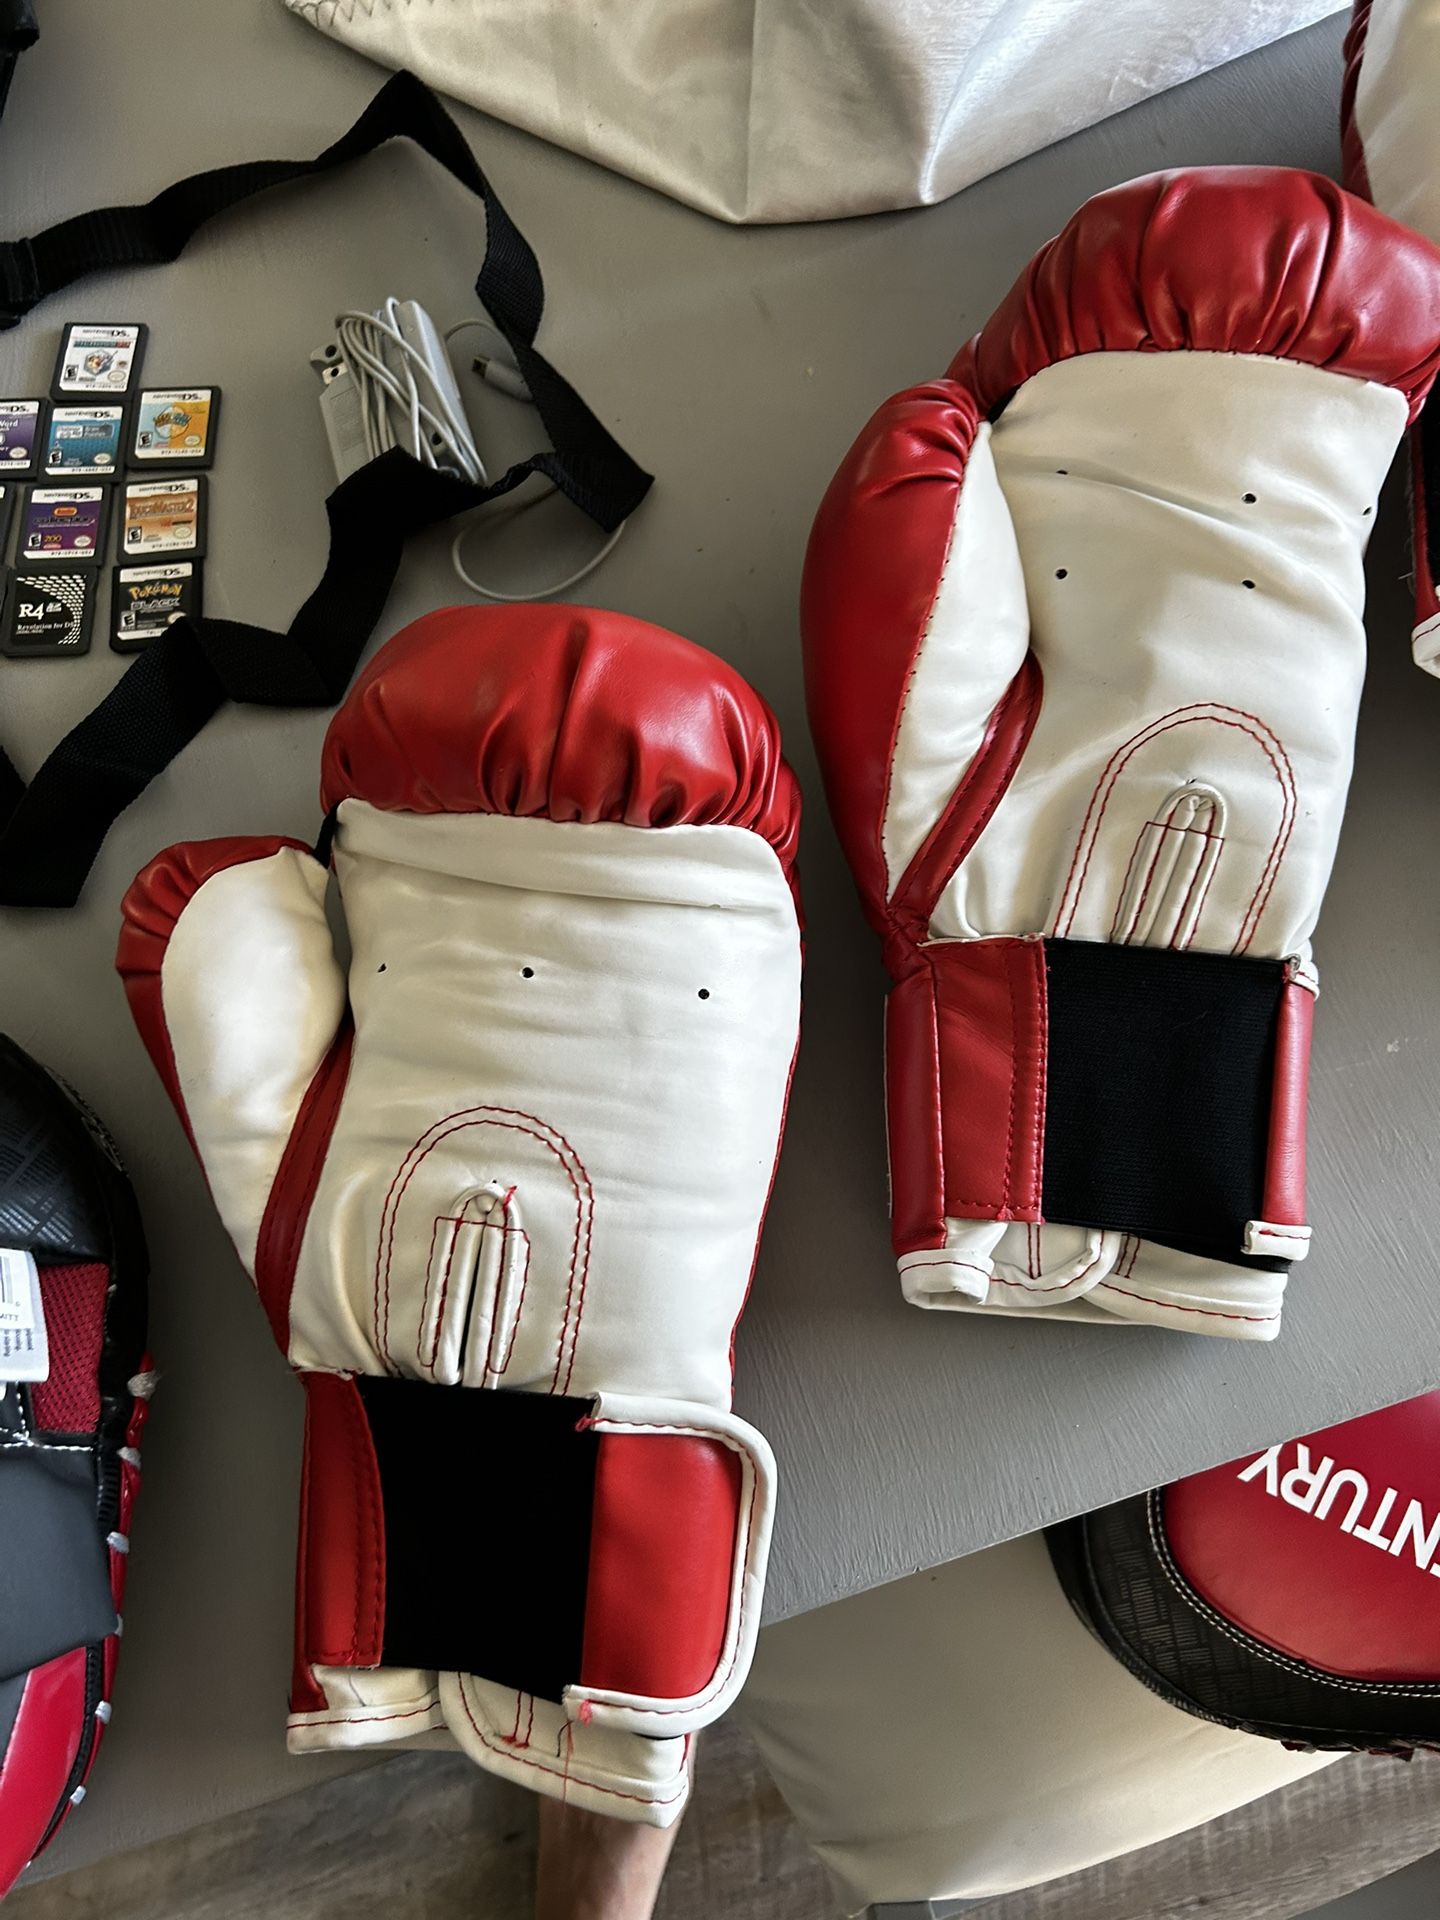 UFC Boxing Training Gloves And Hit Pads All For $60 Used 3 Times Like New LARGE